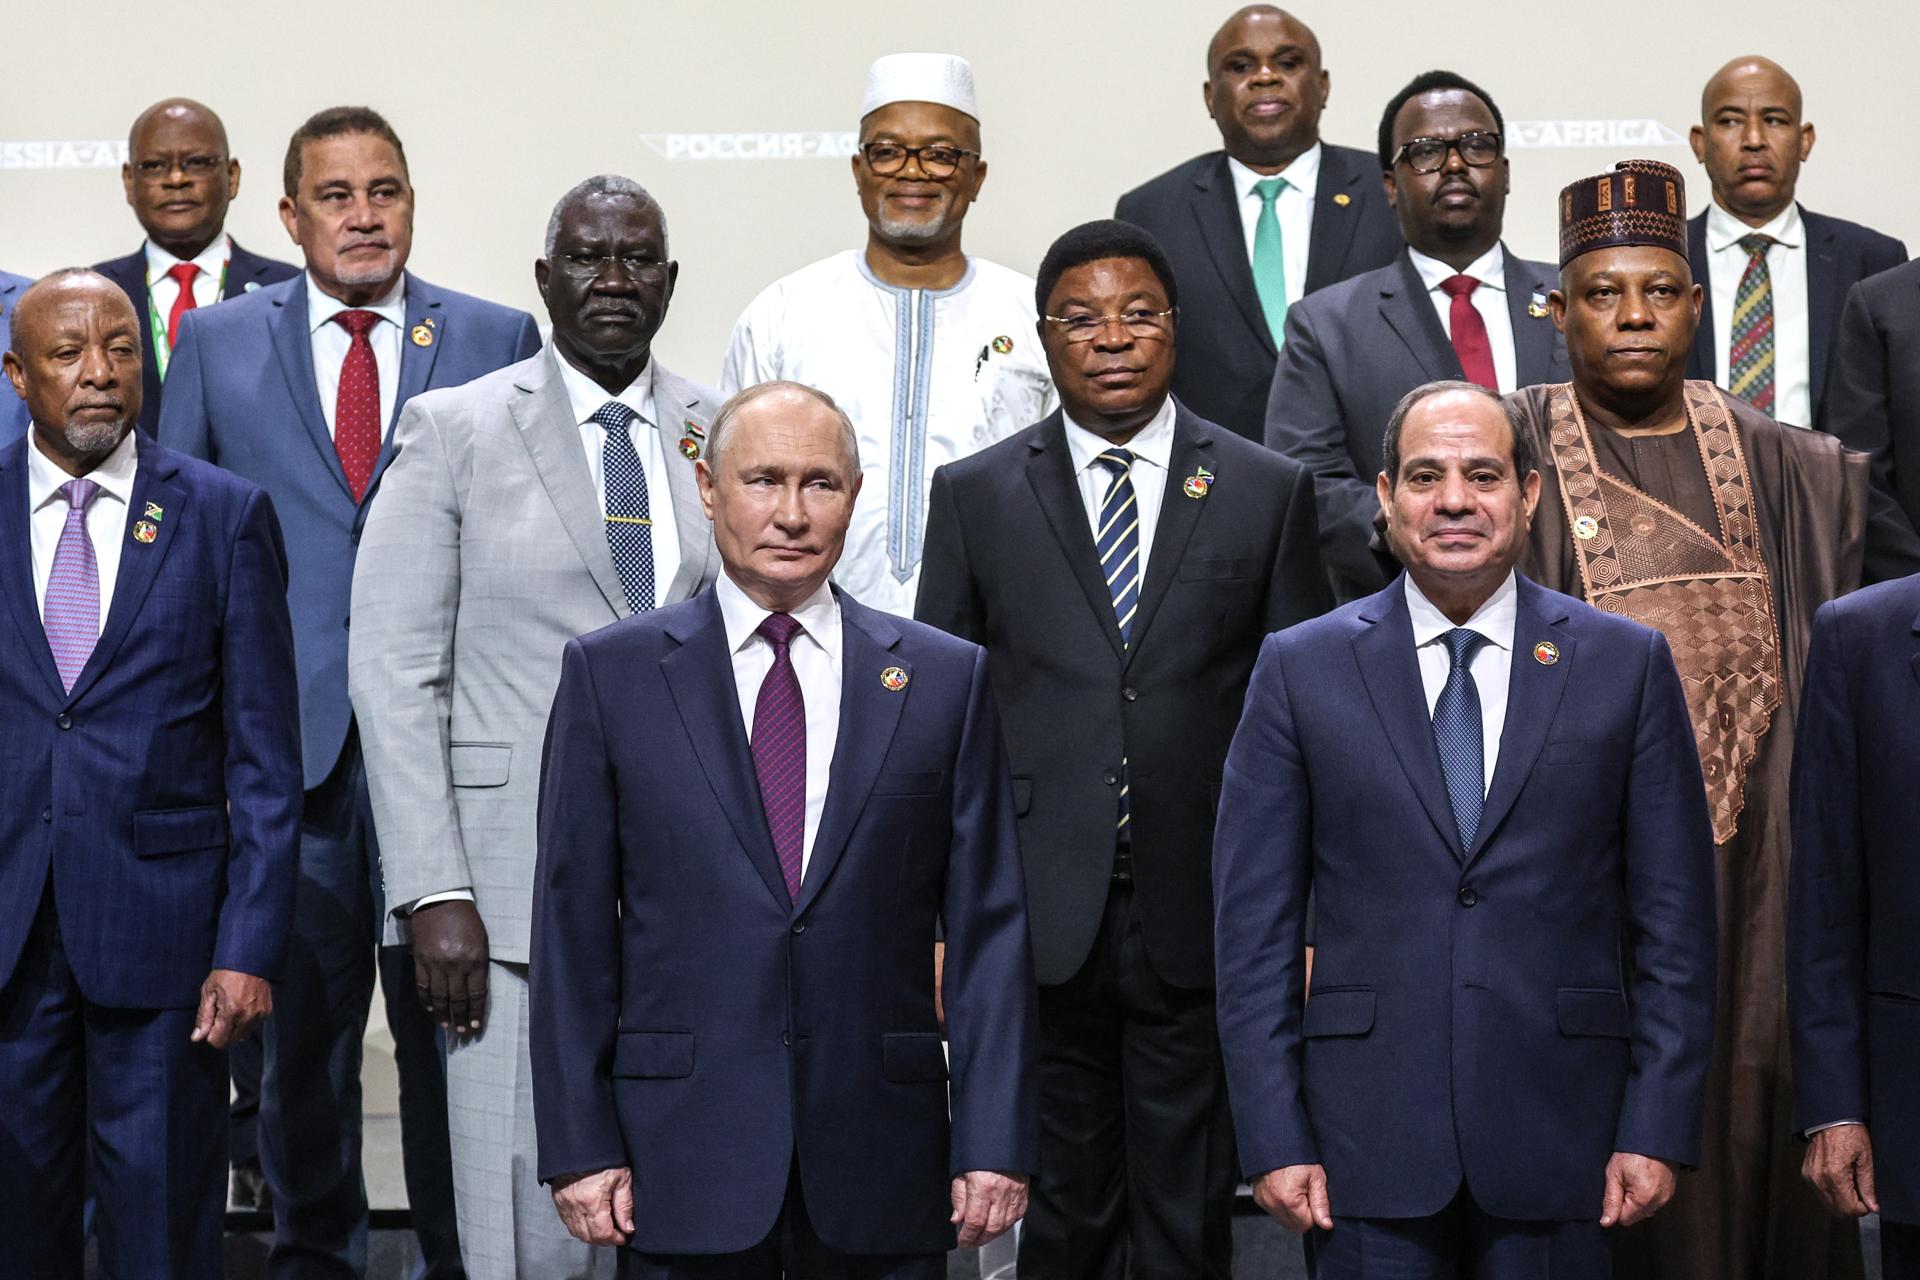 Putin at the Russia-Africa summit